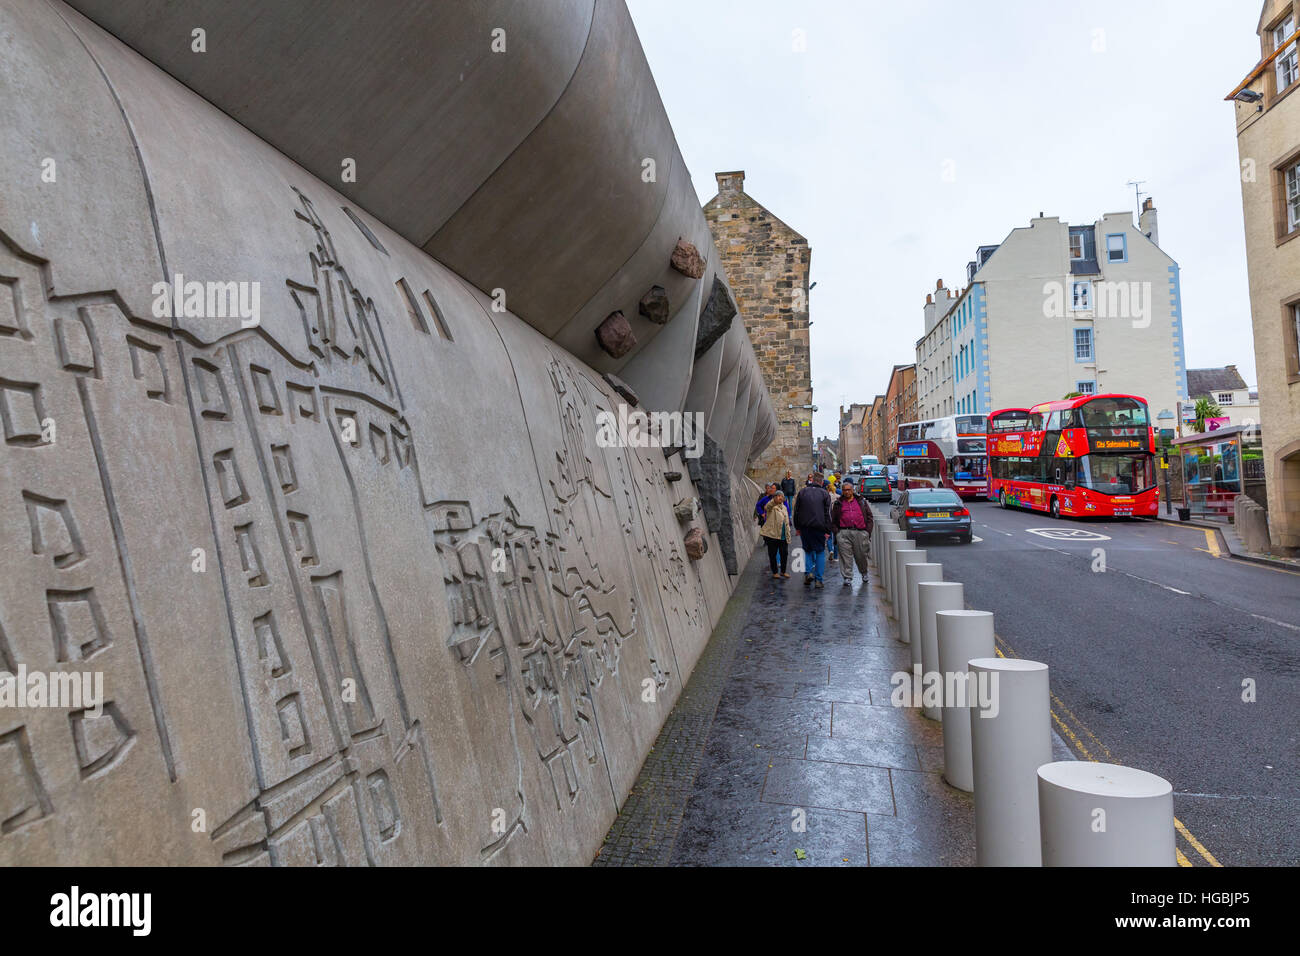 Edinburgh, Scotland - September 09, 2016: building of the Scottish Parliament with unidentified people. Its the official home of the Scottish Parliame Stock Photo